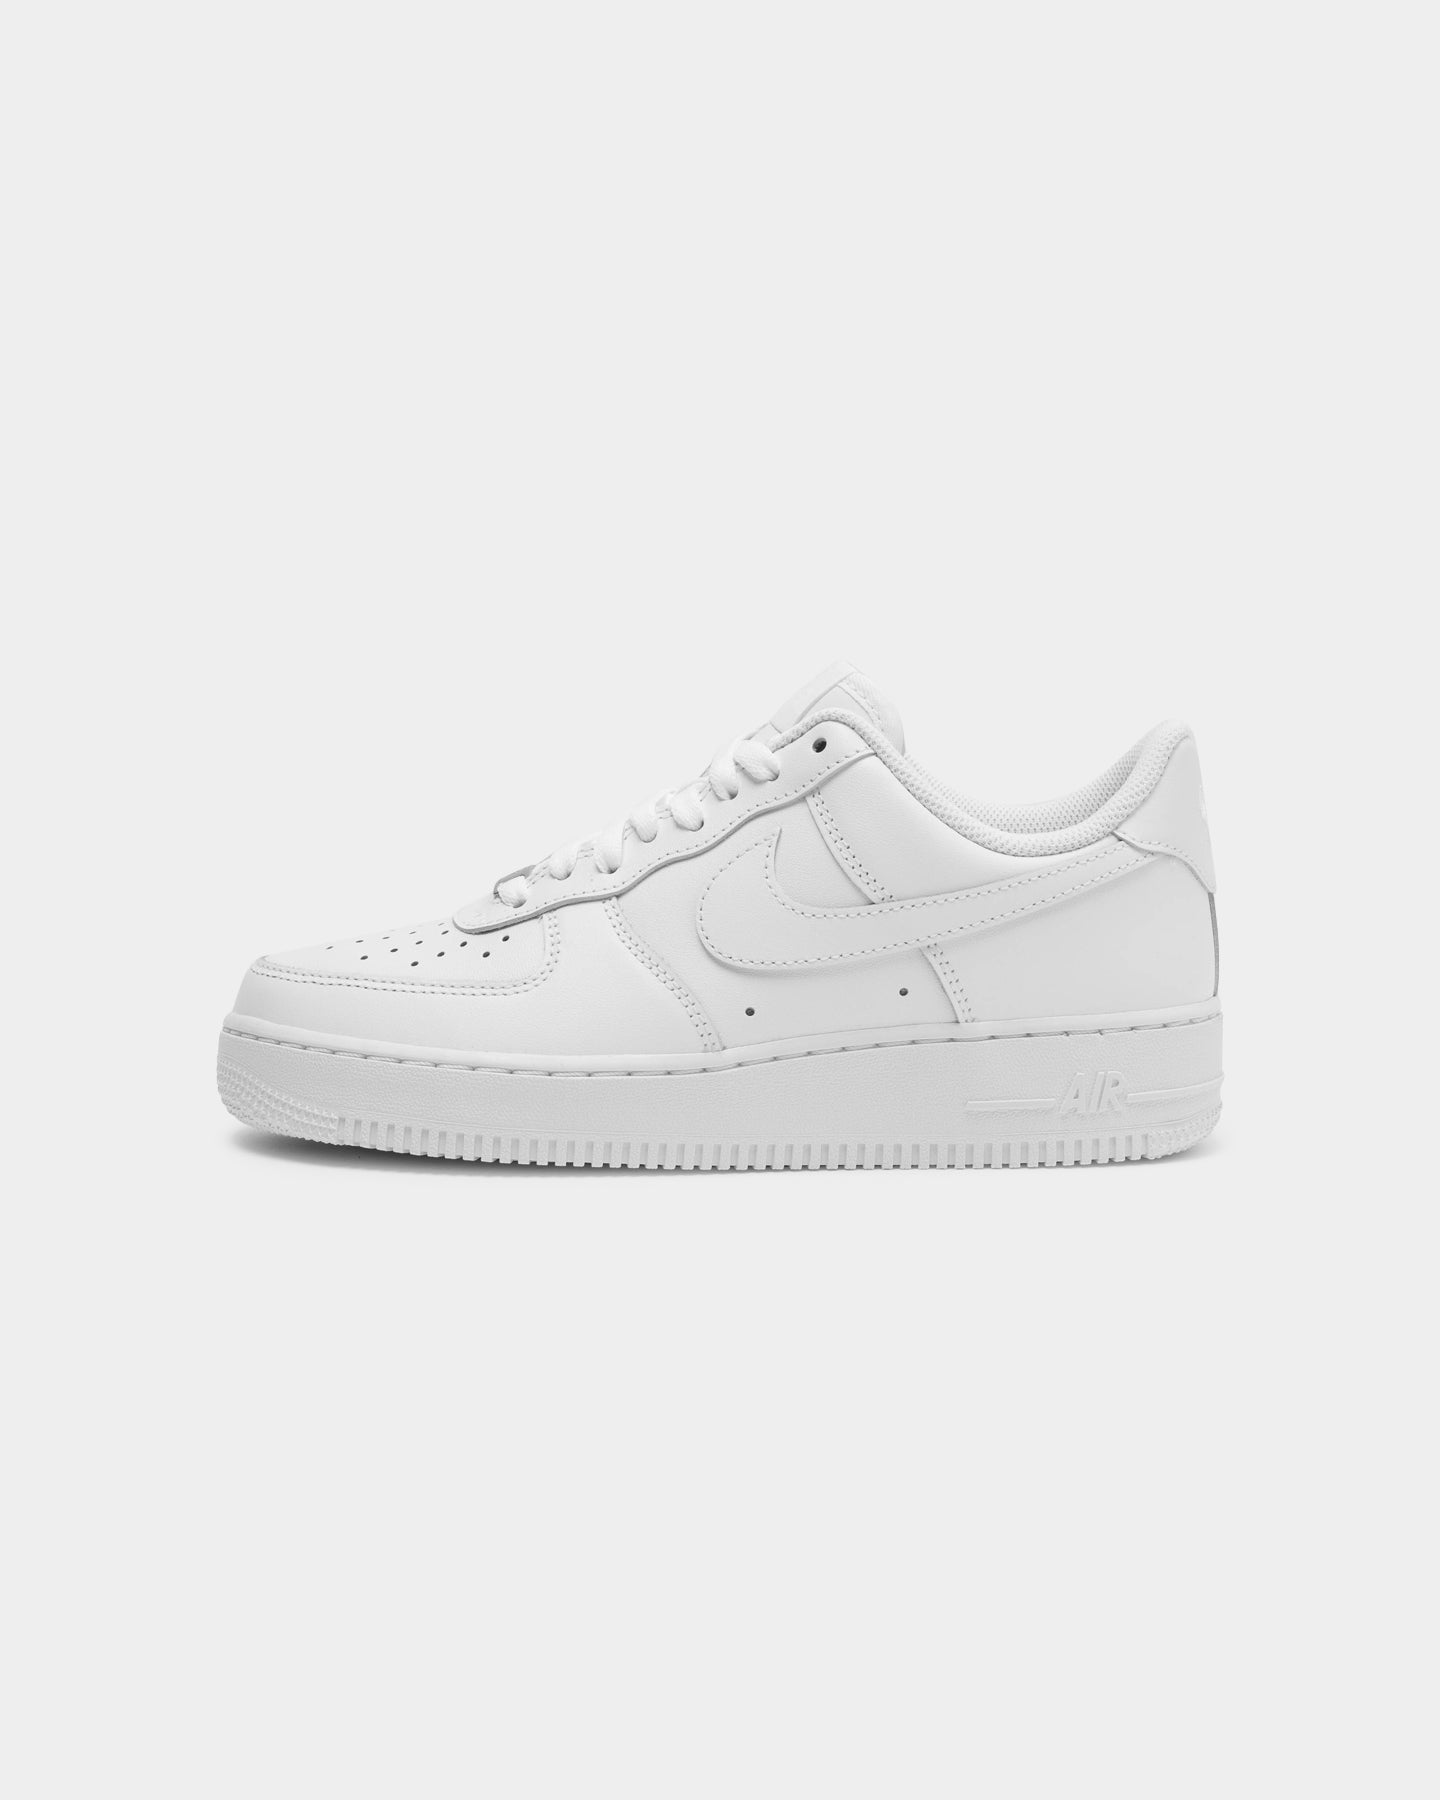 nike air force 1 07 size 8 womens